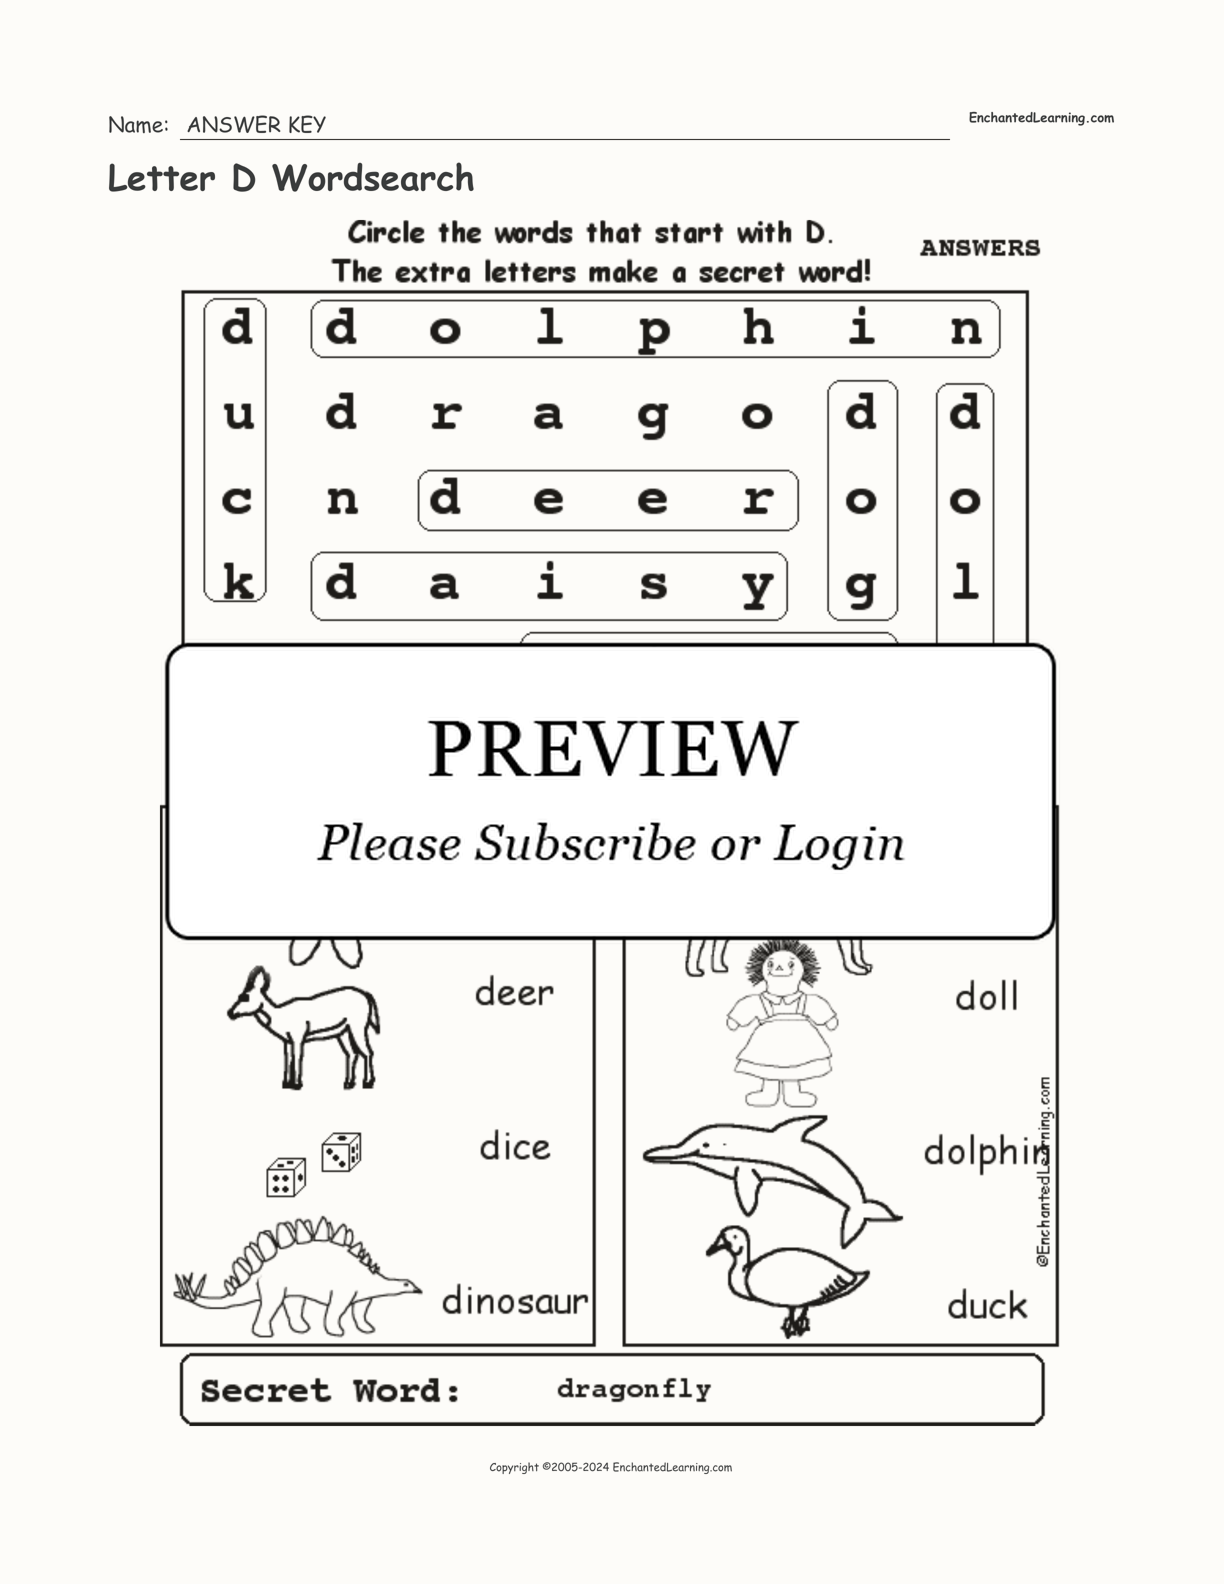 Letter D Wordsearch interactive worksheet page 2